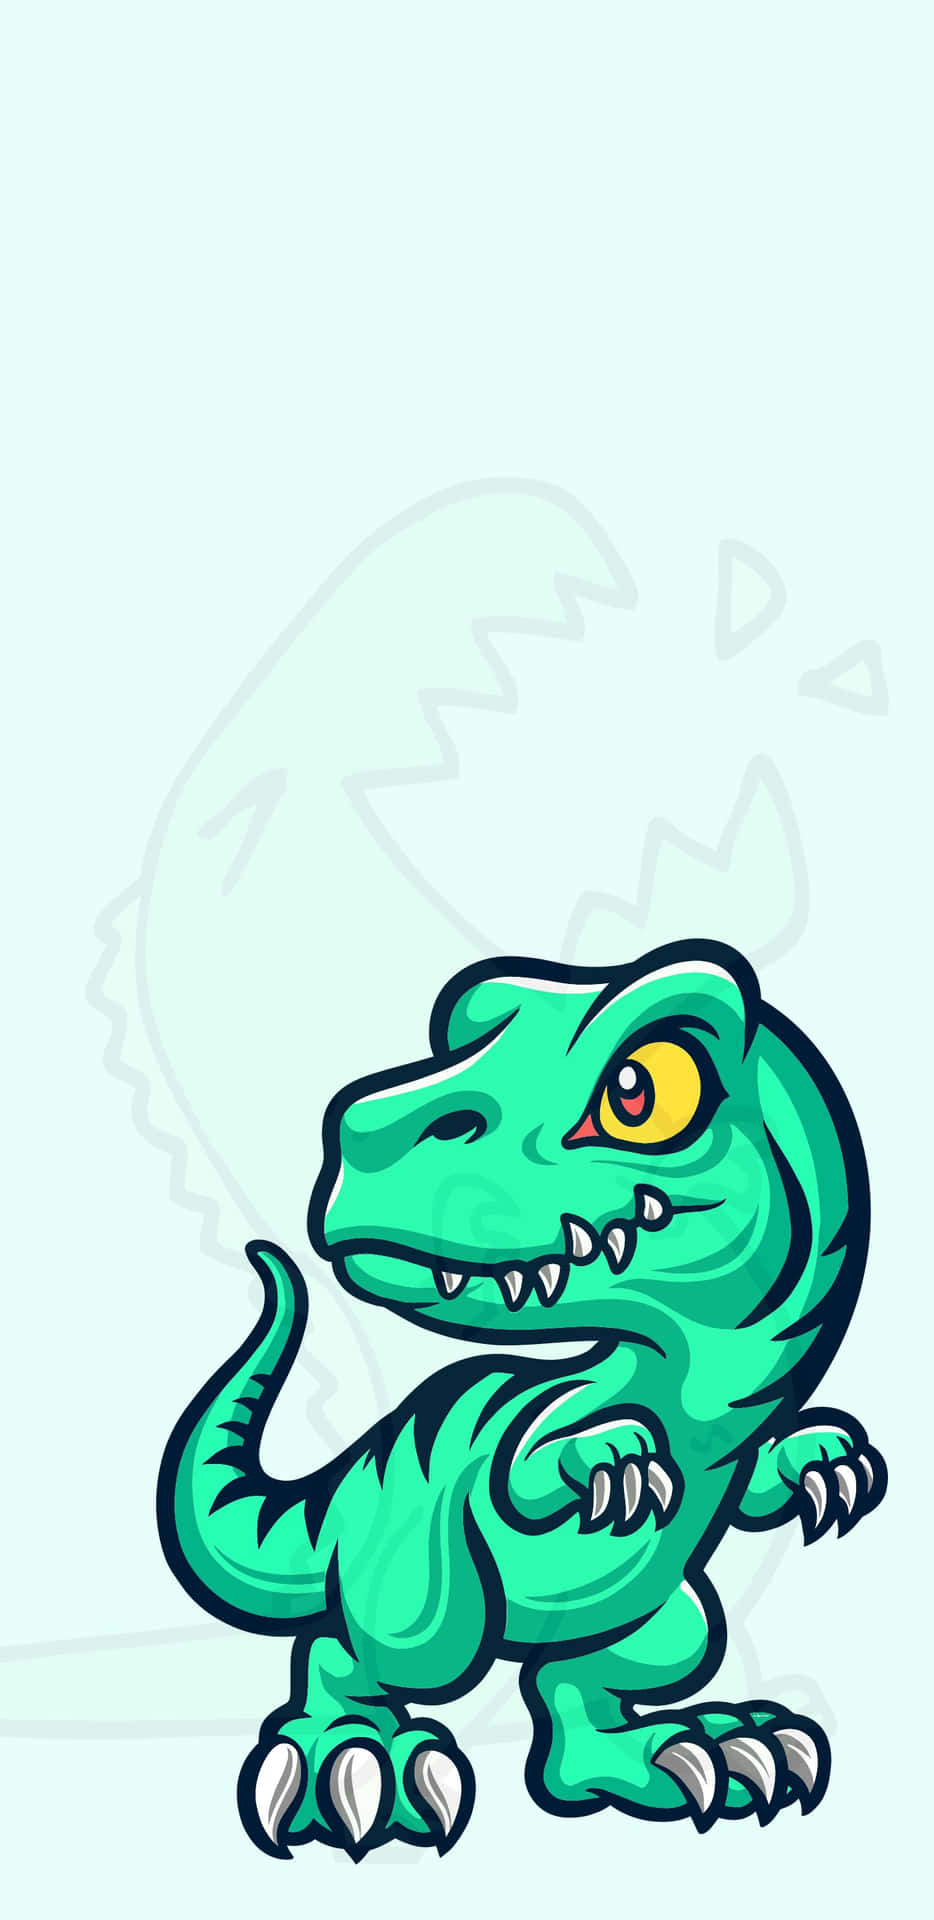 A Cartoon Dinosaur With A Green Body And Yellow Eyes Wallpaper